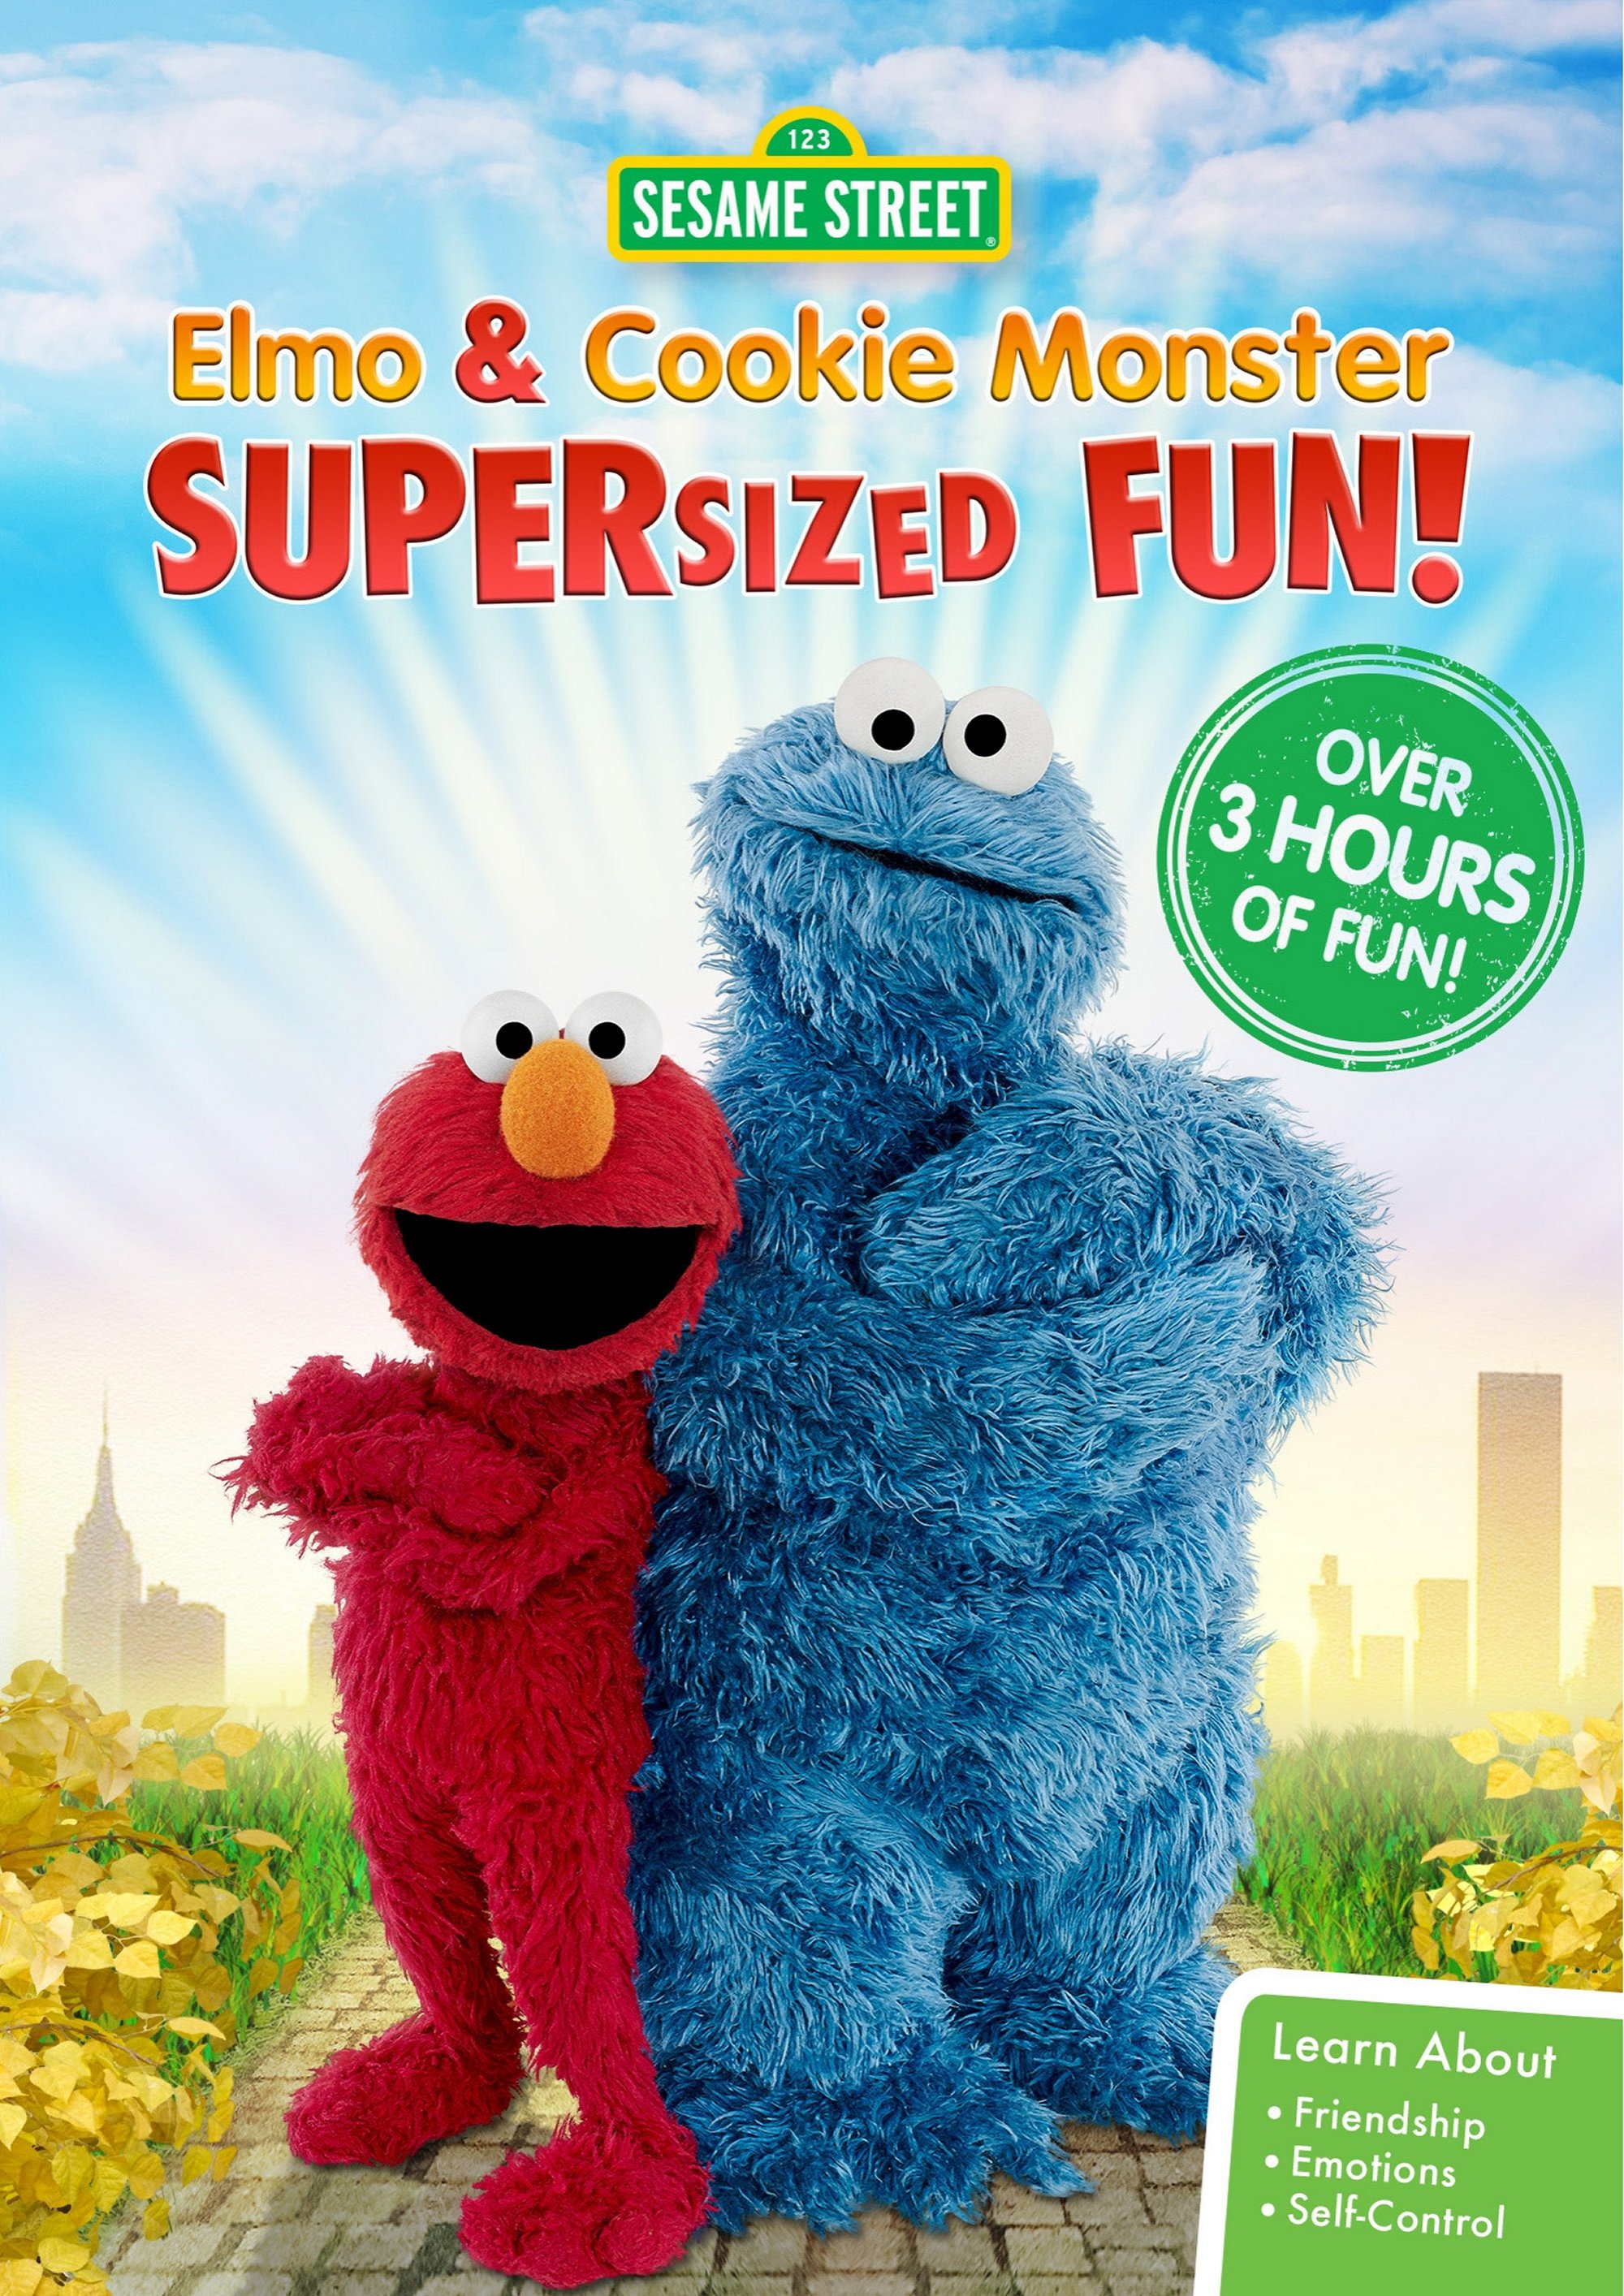 Sesame Street Cookie Monster / Sesame Street viral videos - Muppet Wiki - Sesame street and associated characters, trademarks and design elements are owned and licensed by sesame workshop.